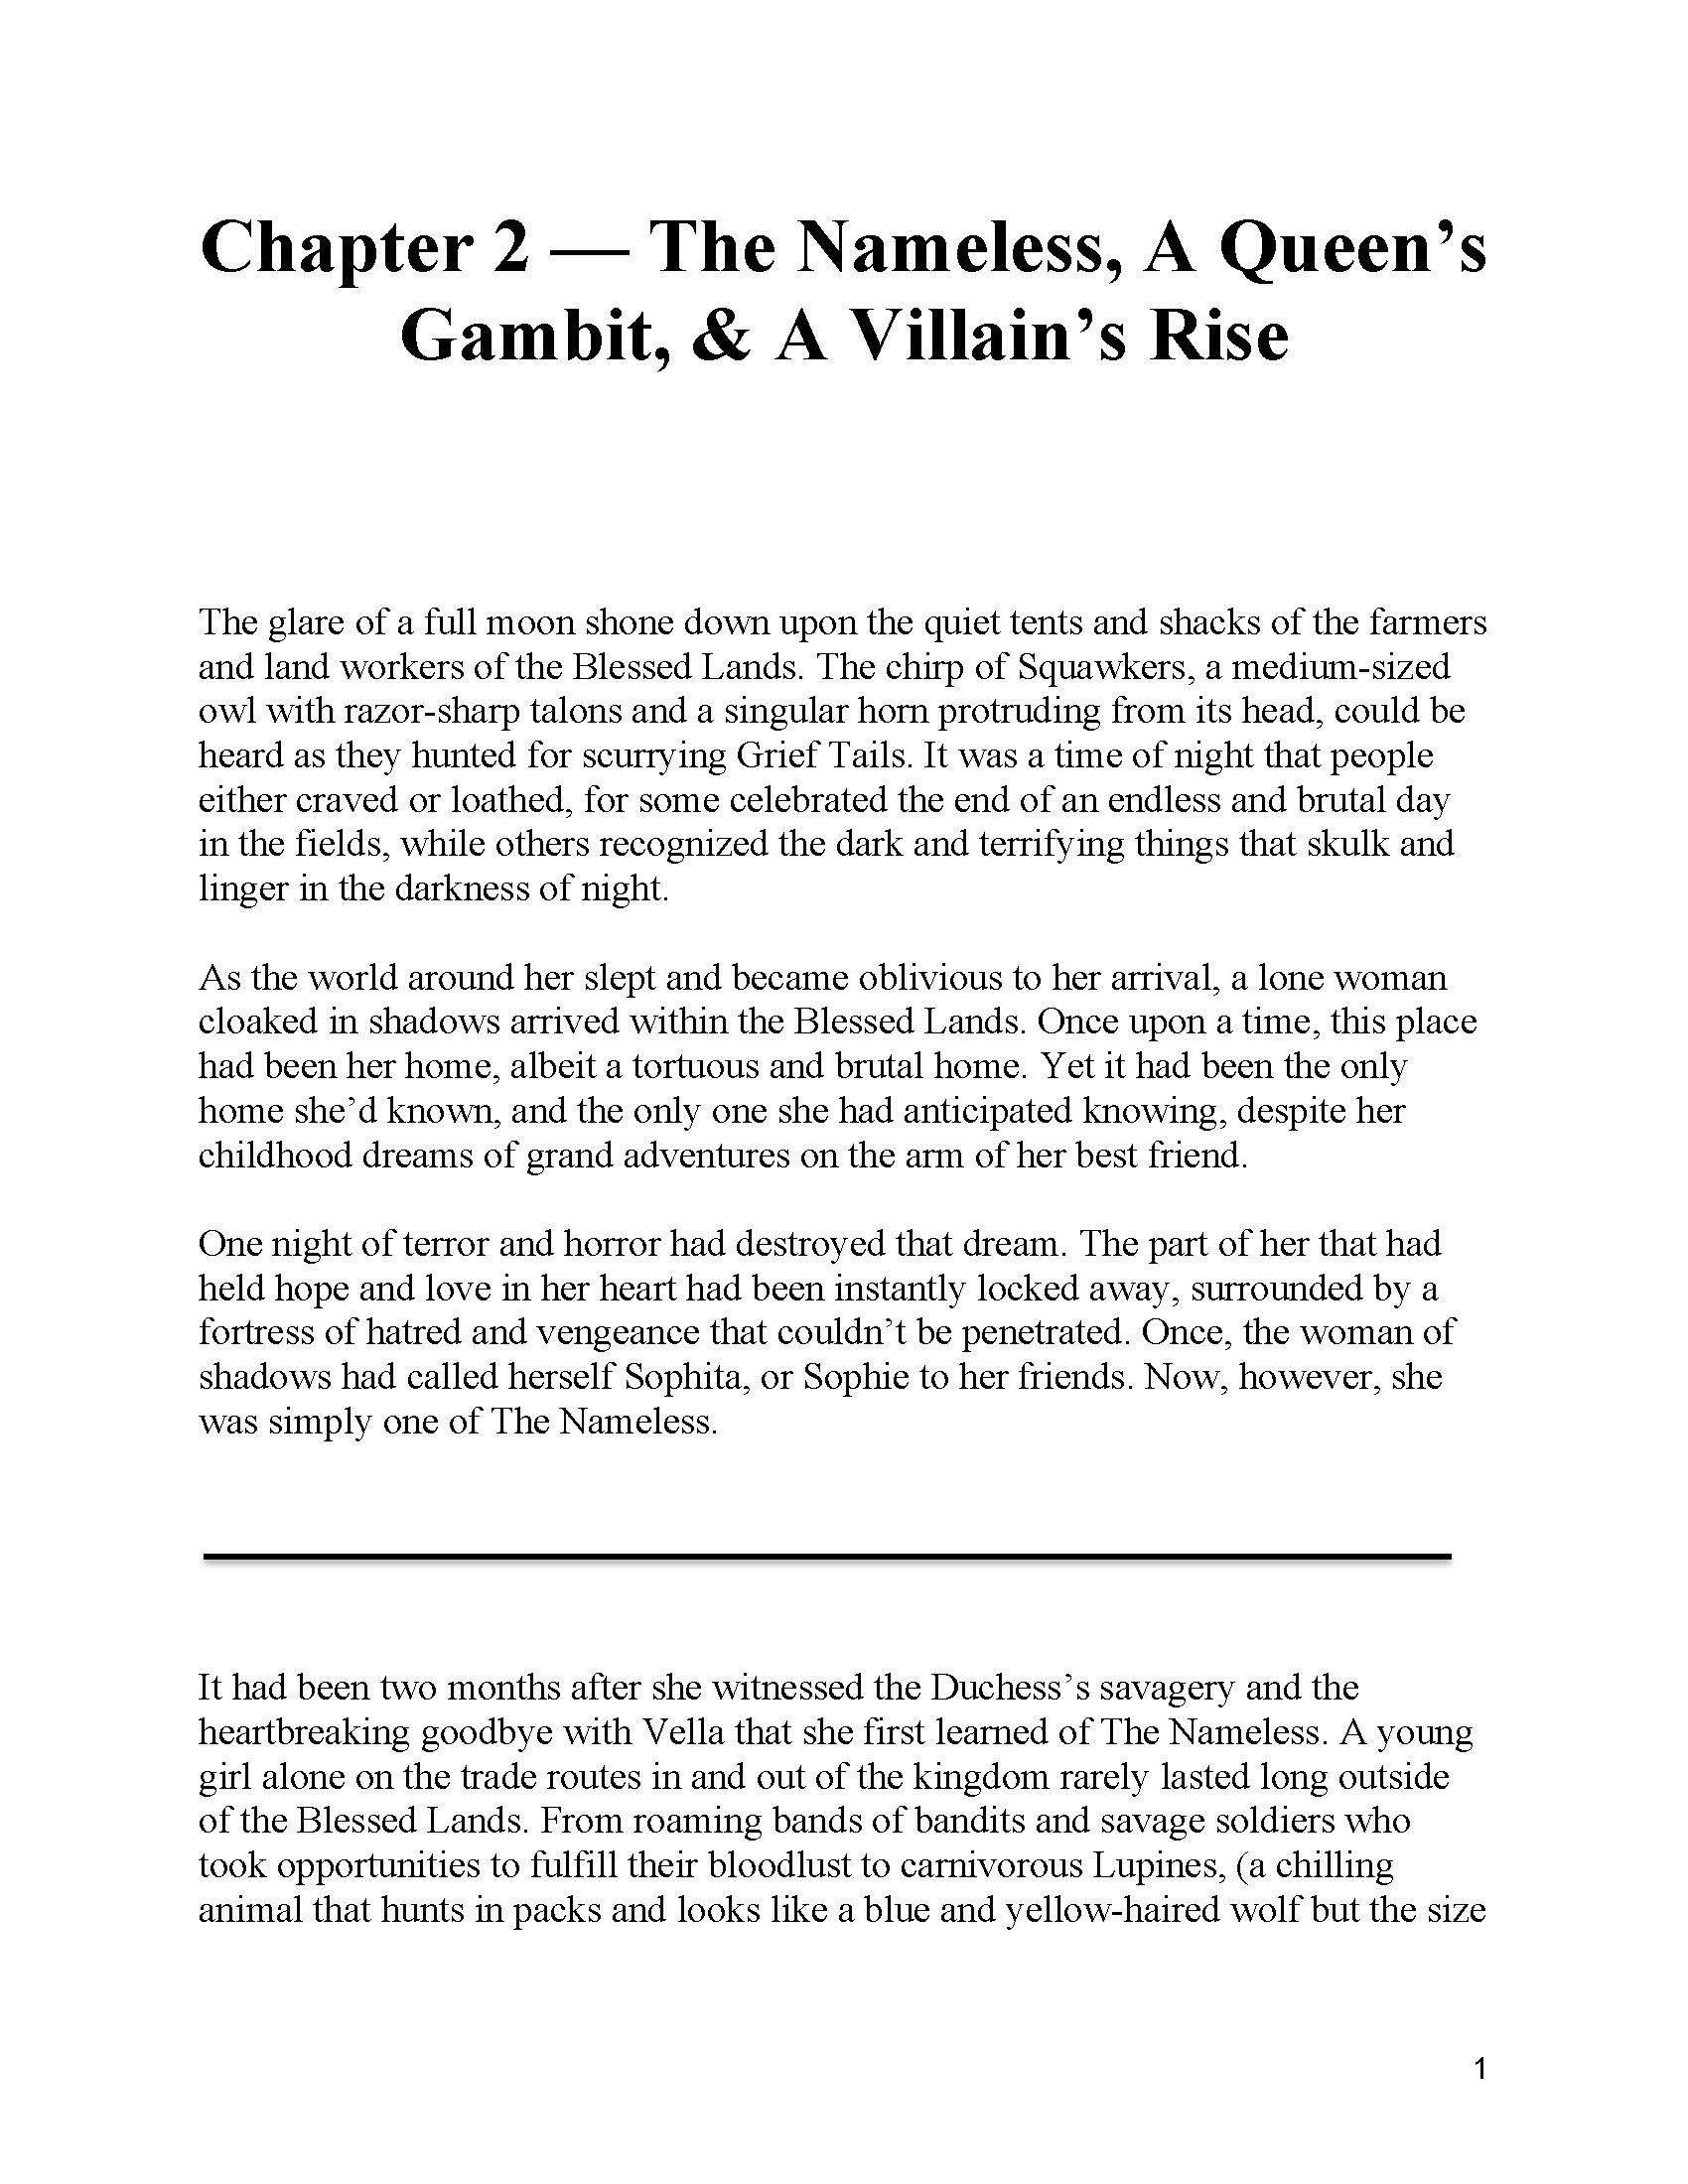 Chapter 2_ The Nameless, A Queen’s Gambit, & A Villain’s Rise - Reviewed & Edited_Page_01.jpg